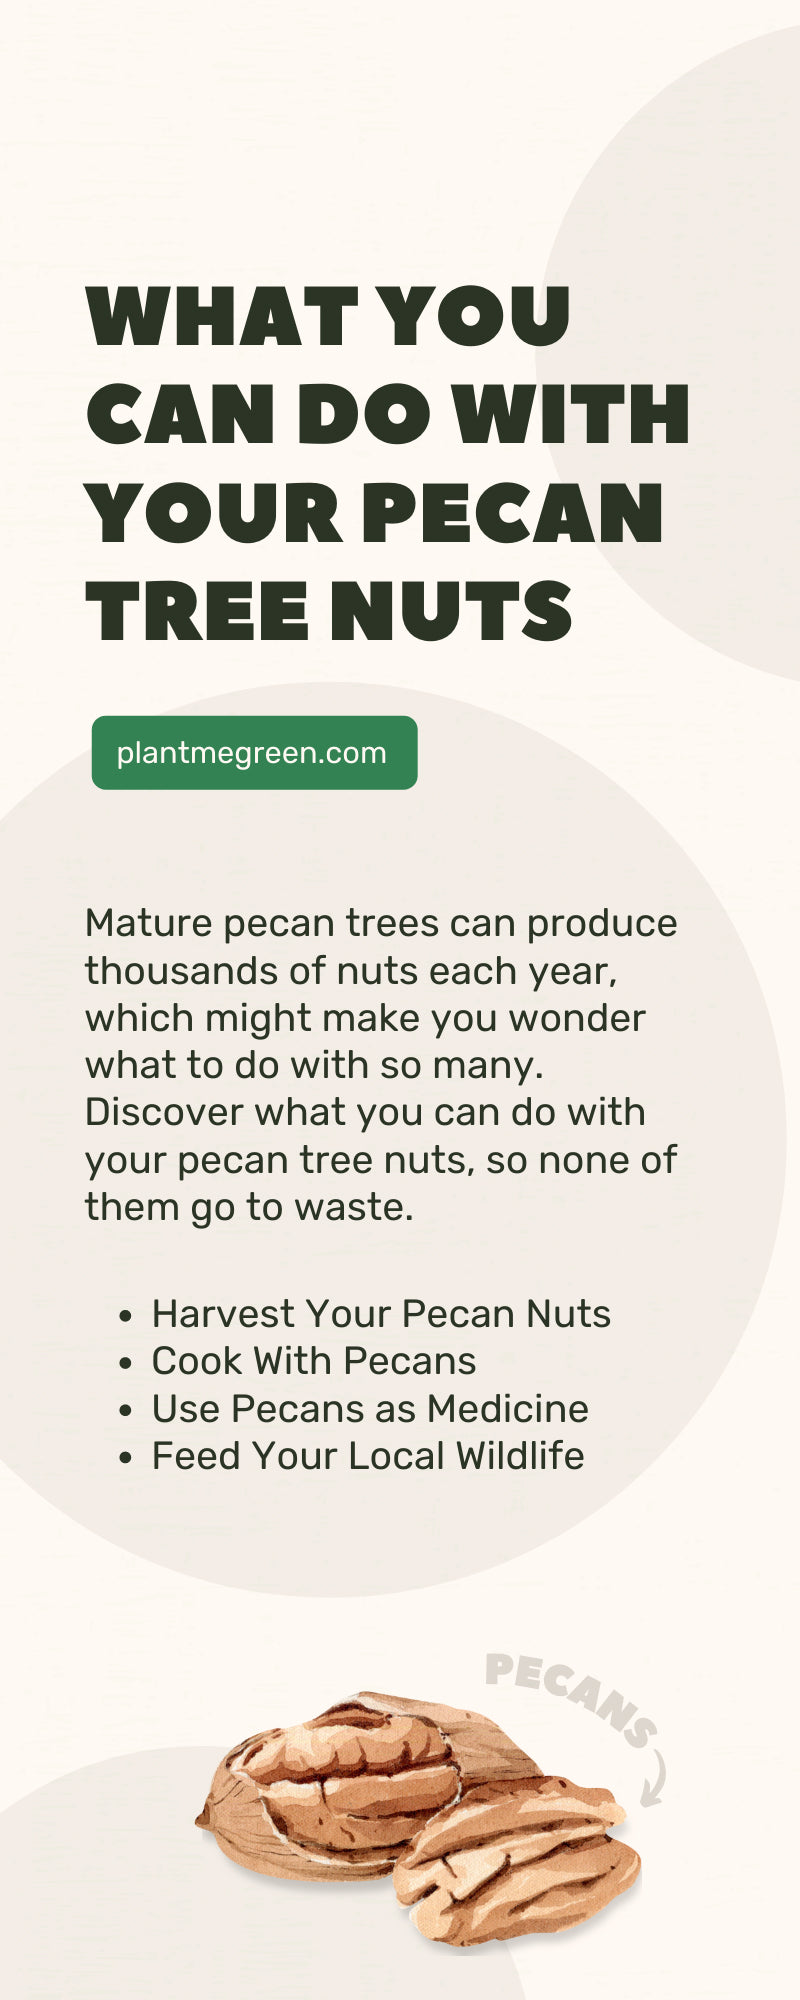 What You Can Do With Your Pecan Tree Nuts